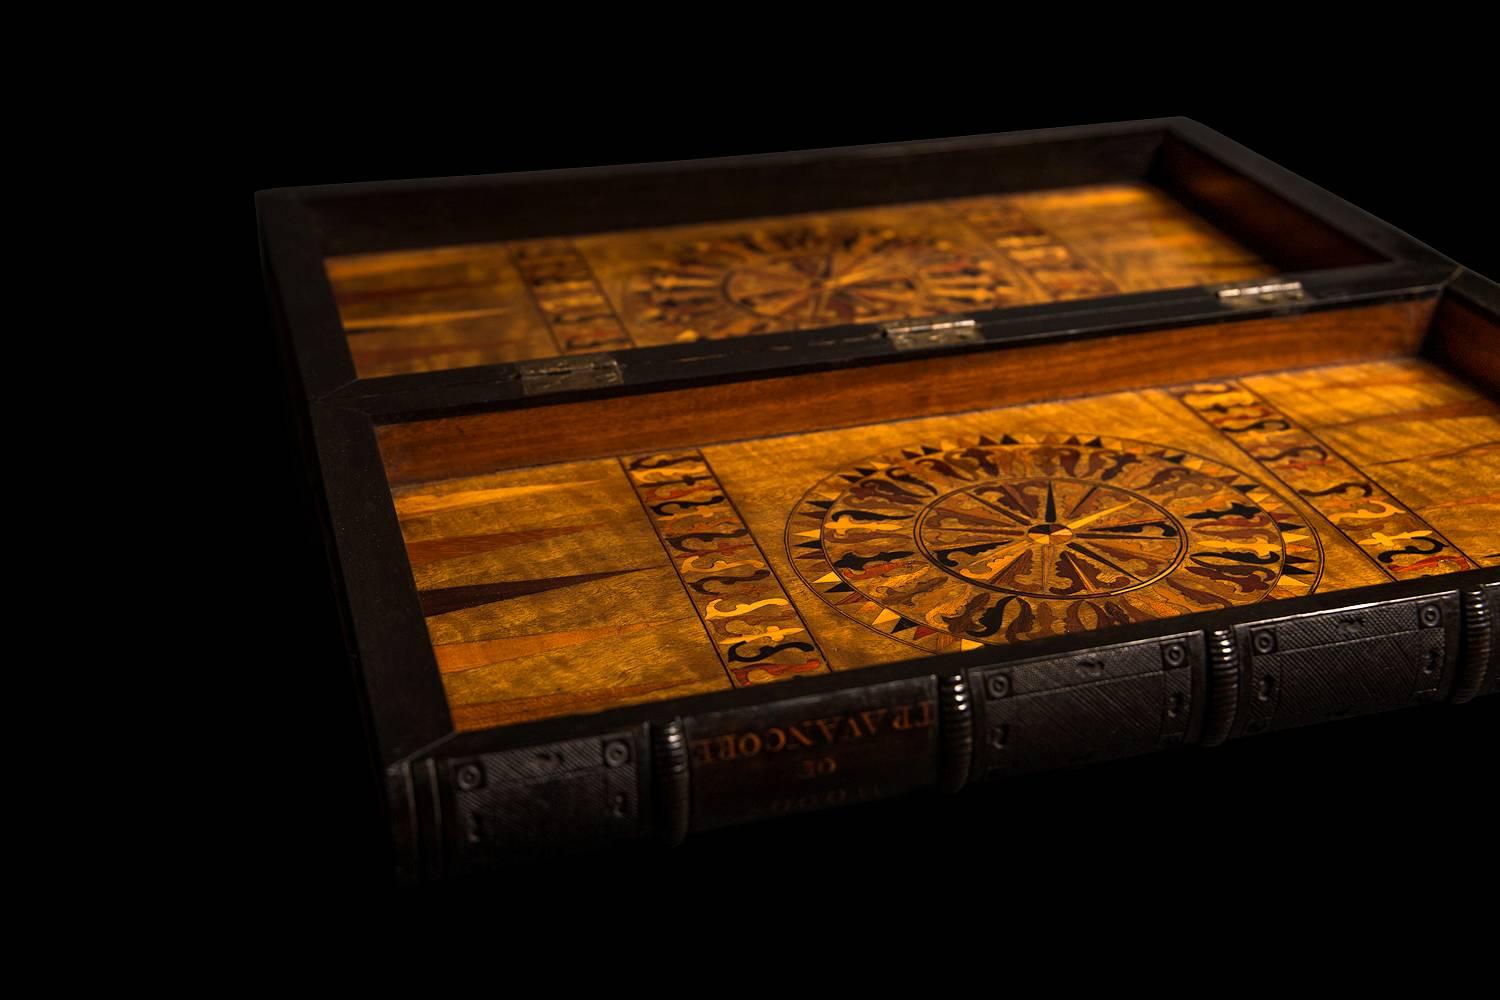 A wonderful collectable piece, the perfect addition to a gentleman's library.

Beautiful parquetry geometric inlay. Made of various exotic timbers from the wood native to 'Travancore' India. This is charmingly carved into the side of the box in